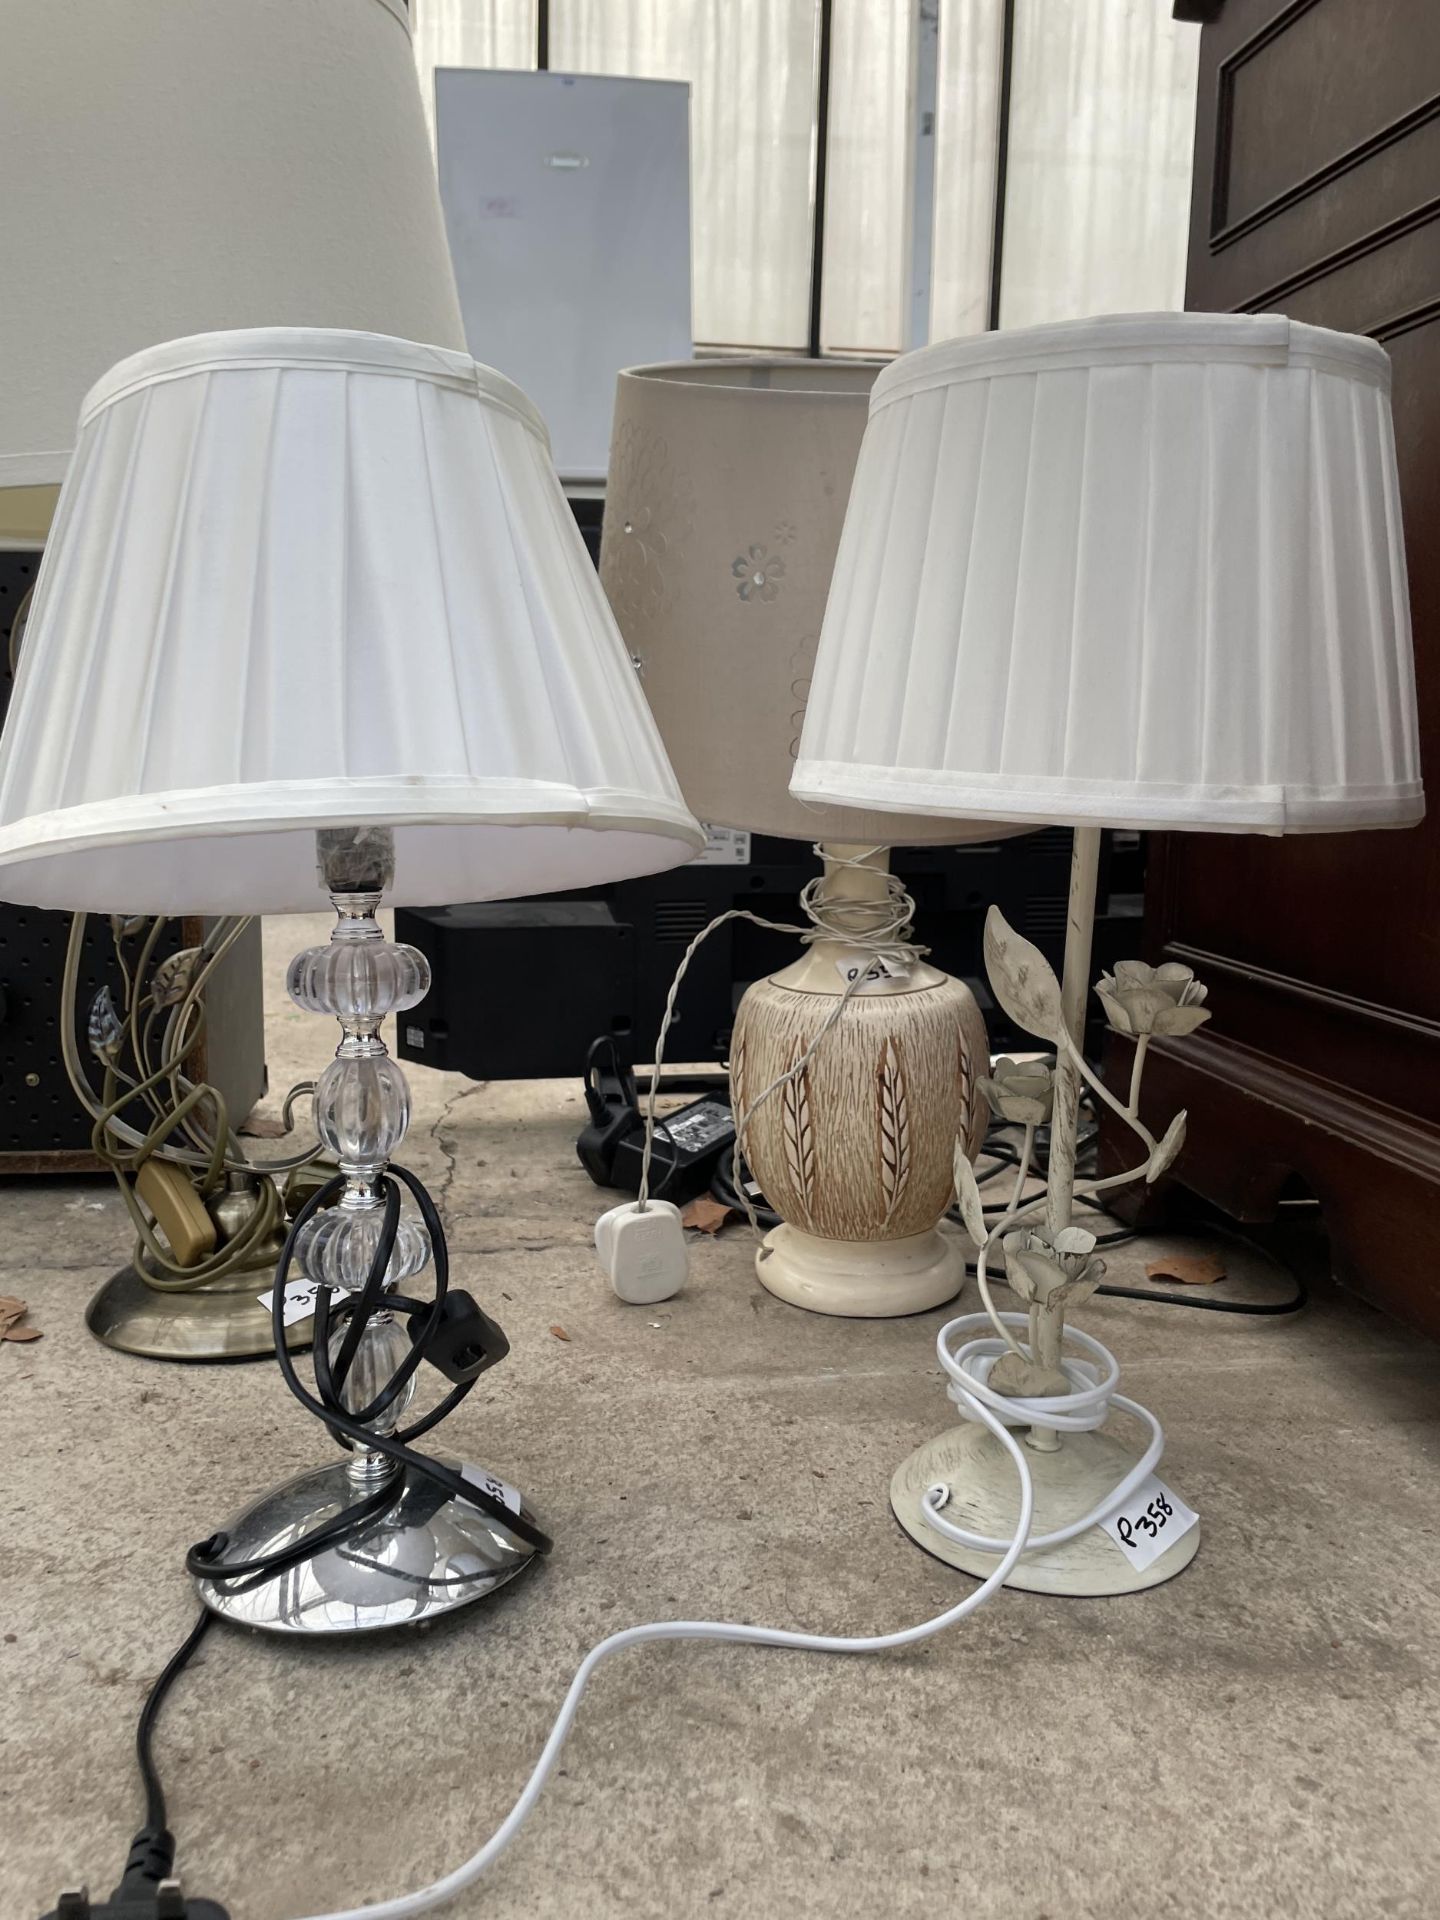 FOUR VARIOUS TABLE LAMPS - Image 2 of 2